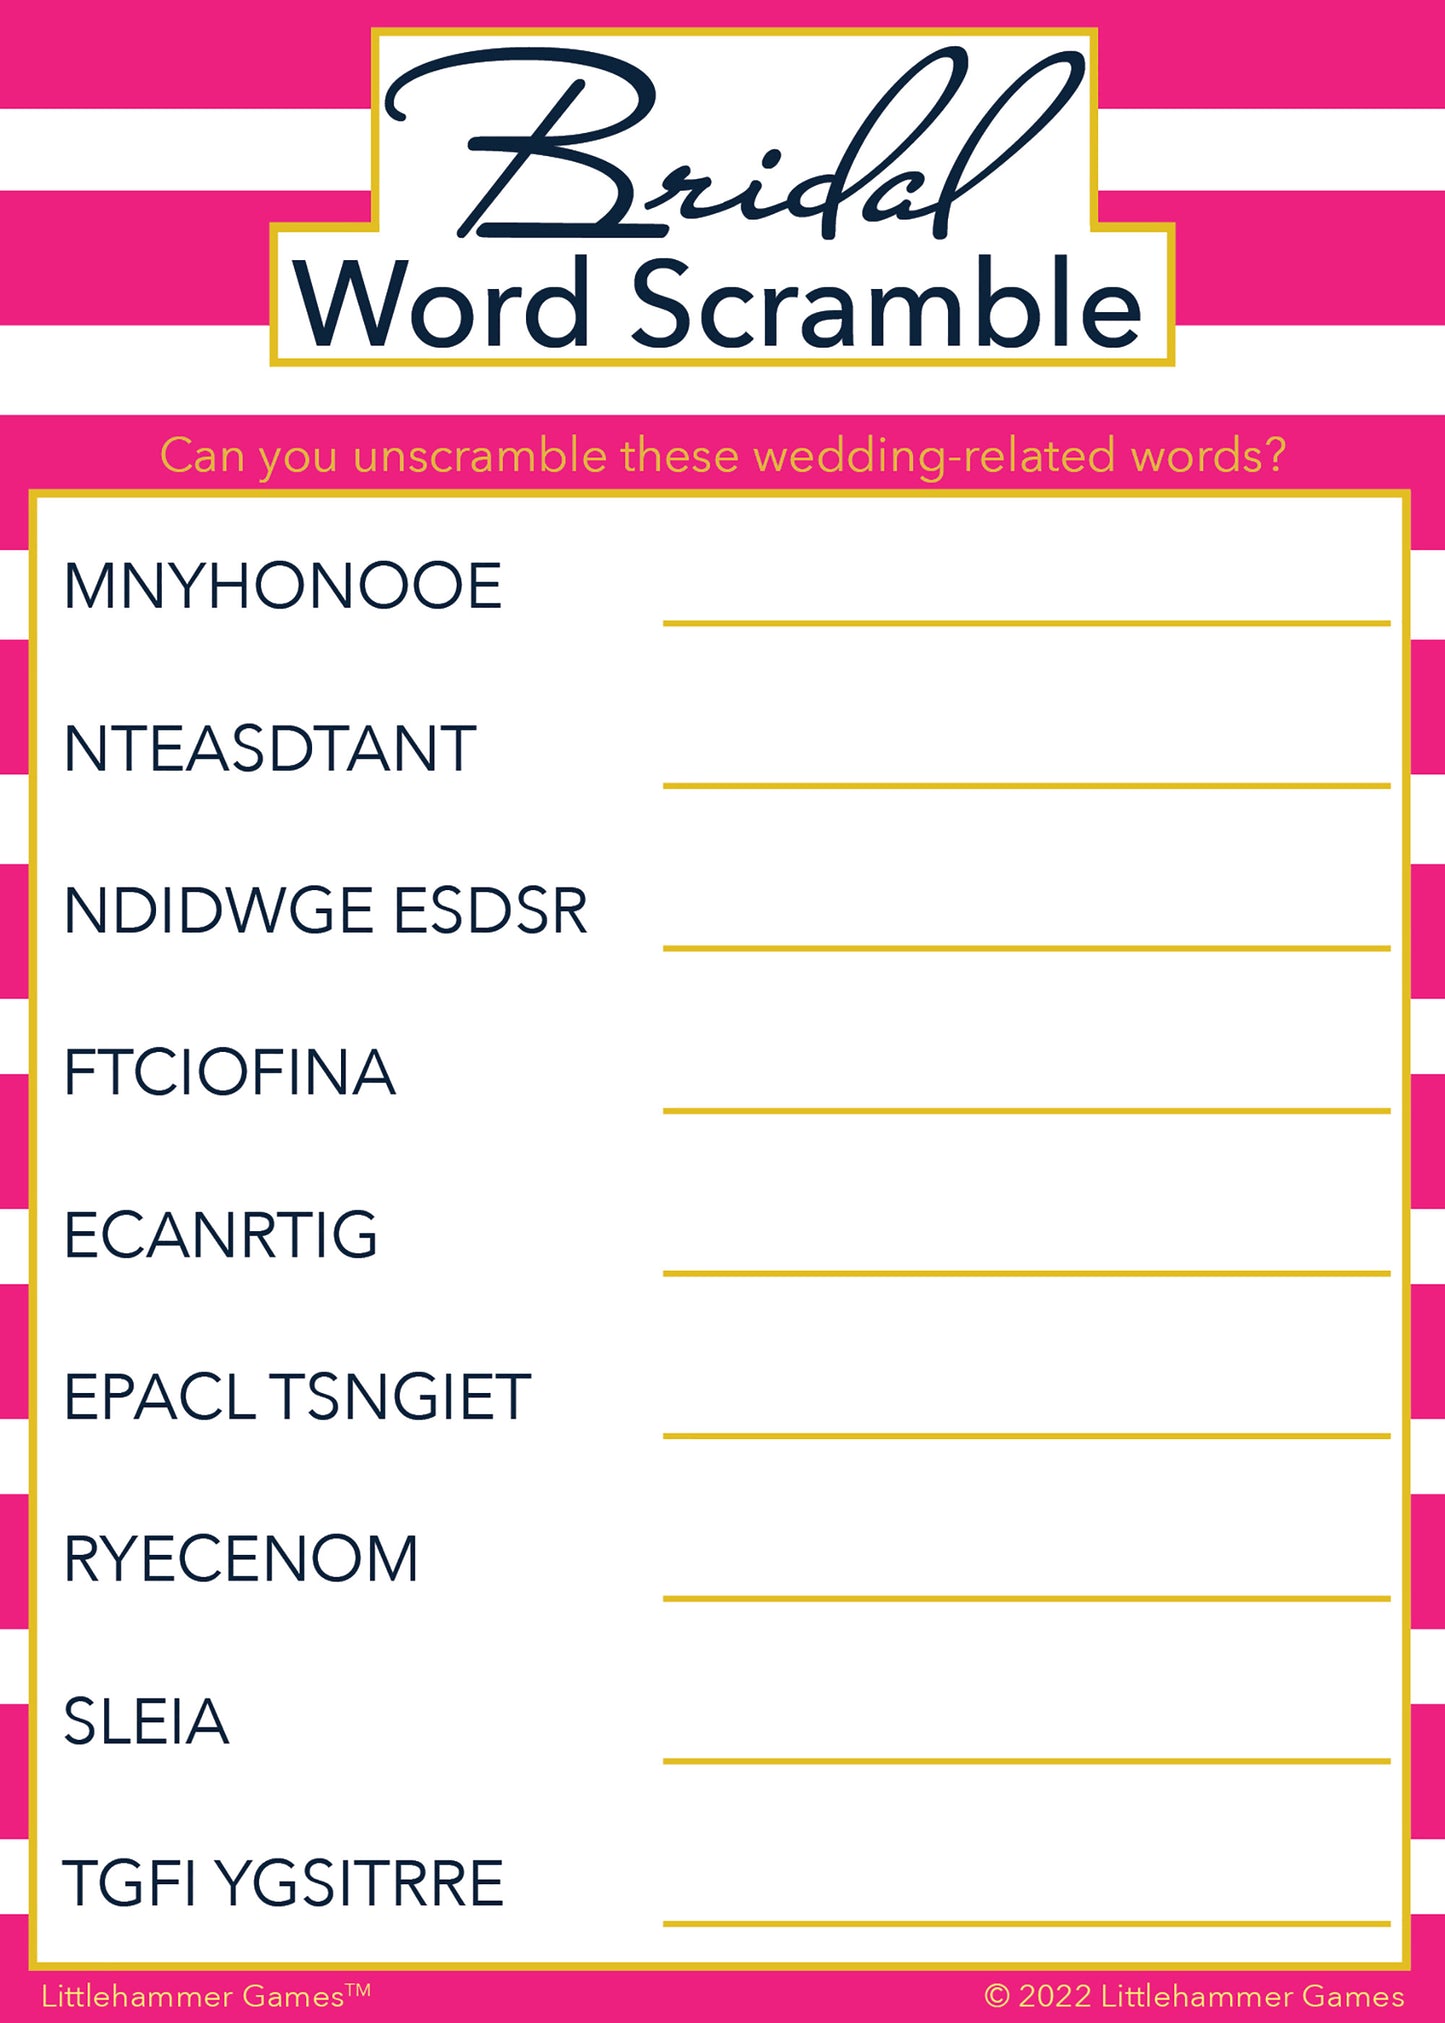 Bridal Word Scramble game card with a pink-striped background